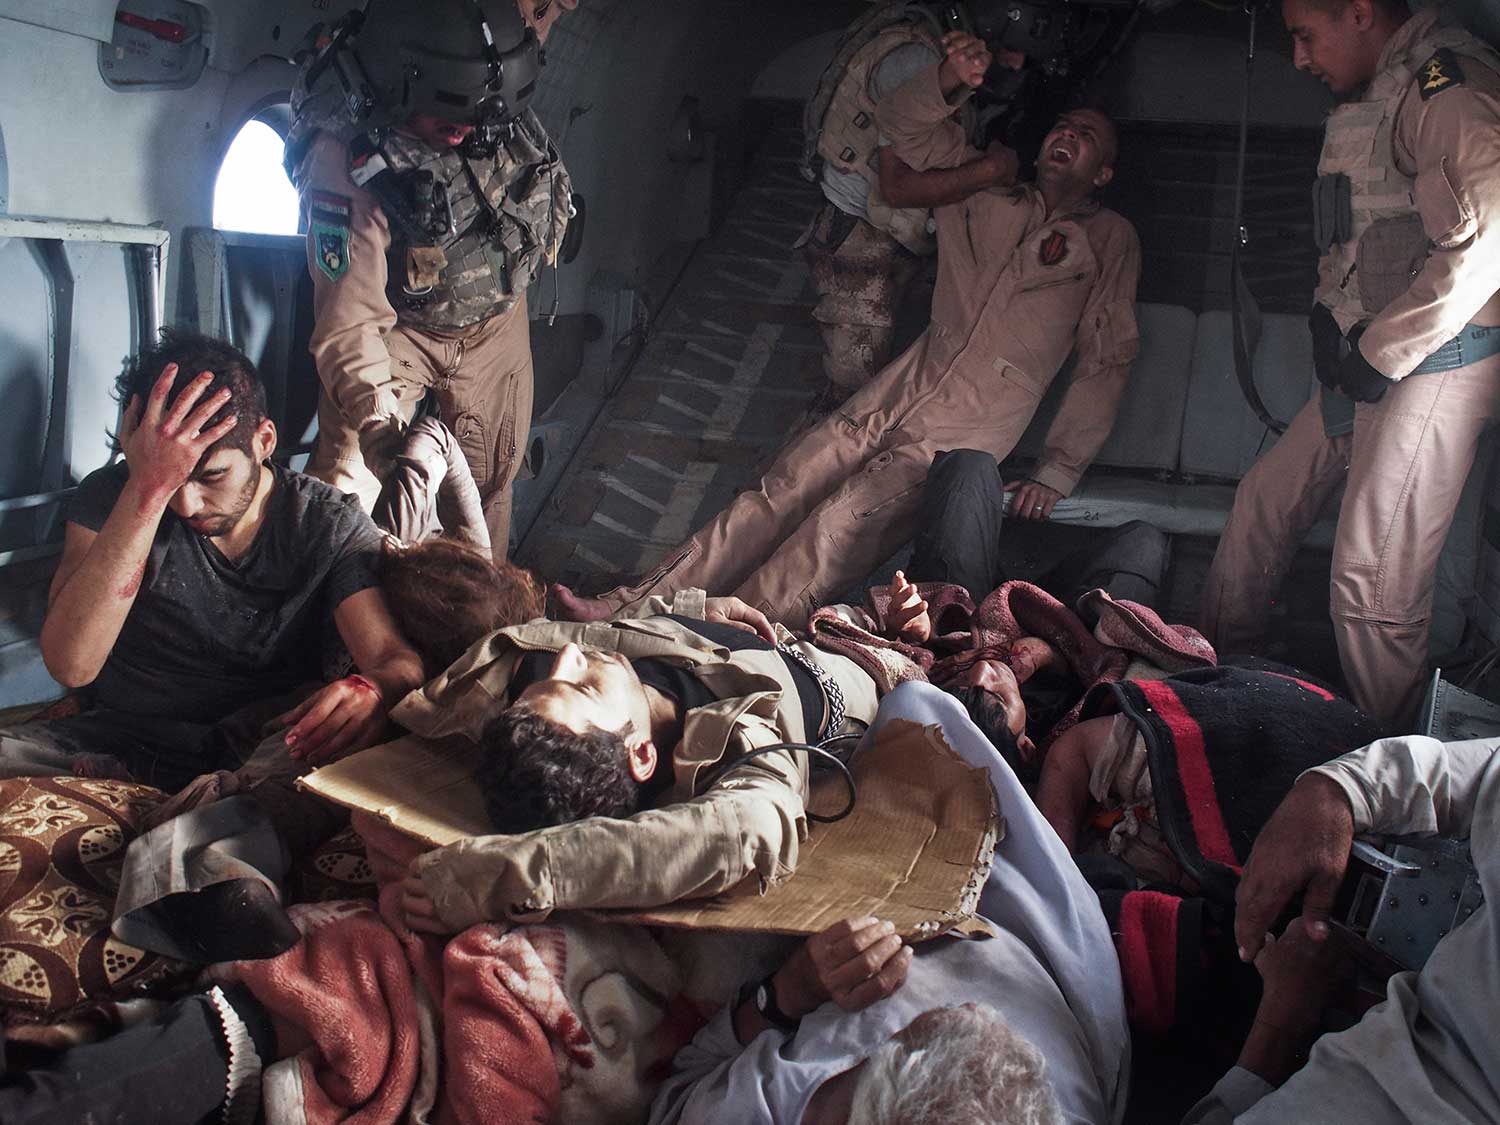 Sinjar Mountains, Iraq. August 12, 2014.Survivors of the crash, including yazidi refugees and Kurdish and Iraqi Army personnel, onboard a rescue helicopter that transported them from the crash site back to Kurdish-controlled Dohuk Province. An Iraqi Air Force helicopter on a resue misssion in the Sinjar Mountains crashed shortly after takeoff. Onboard the helicopter were dozens of Yazidi refugees stranded in the mountain for days unable to reach the safety of Kurdish-controlled areas of northern Iraq.(Photo by Moises Saman/MAGNUM)